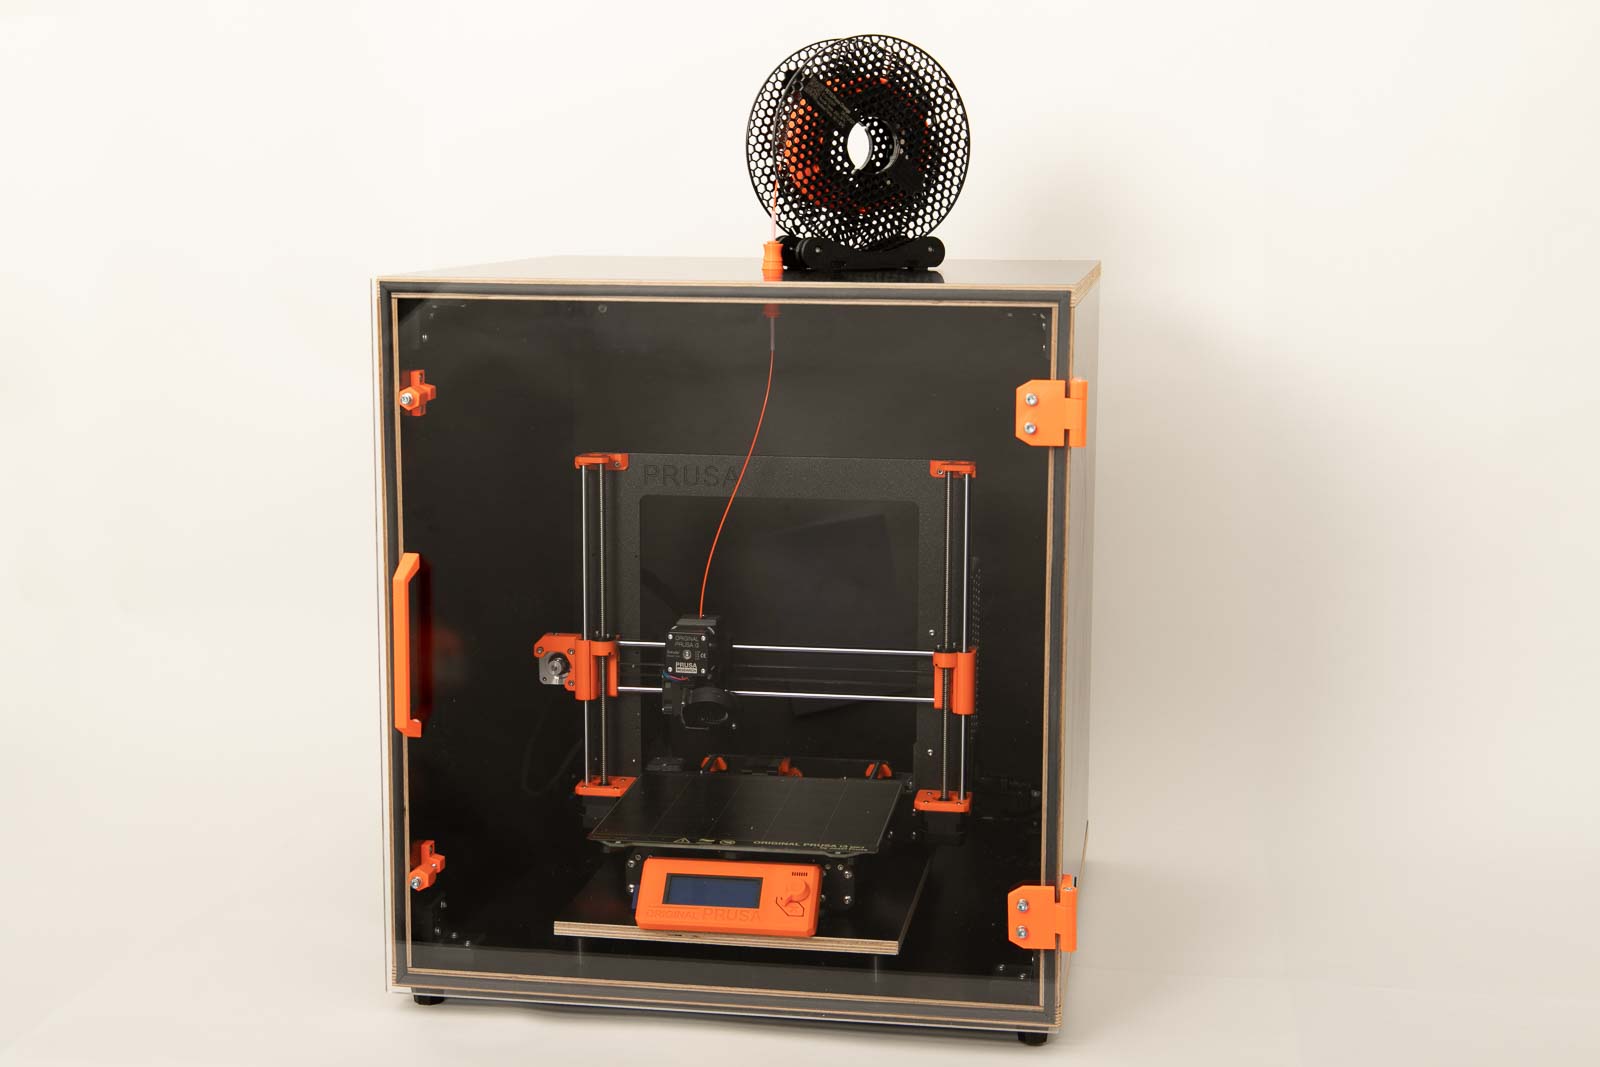 Build a DIY 3D printer enclosure and feed filament from above